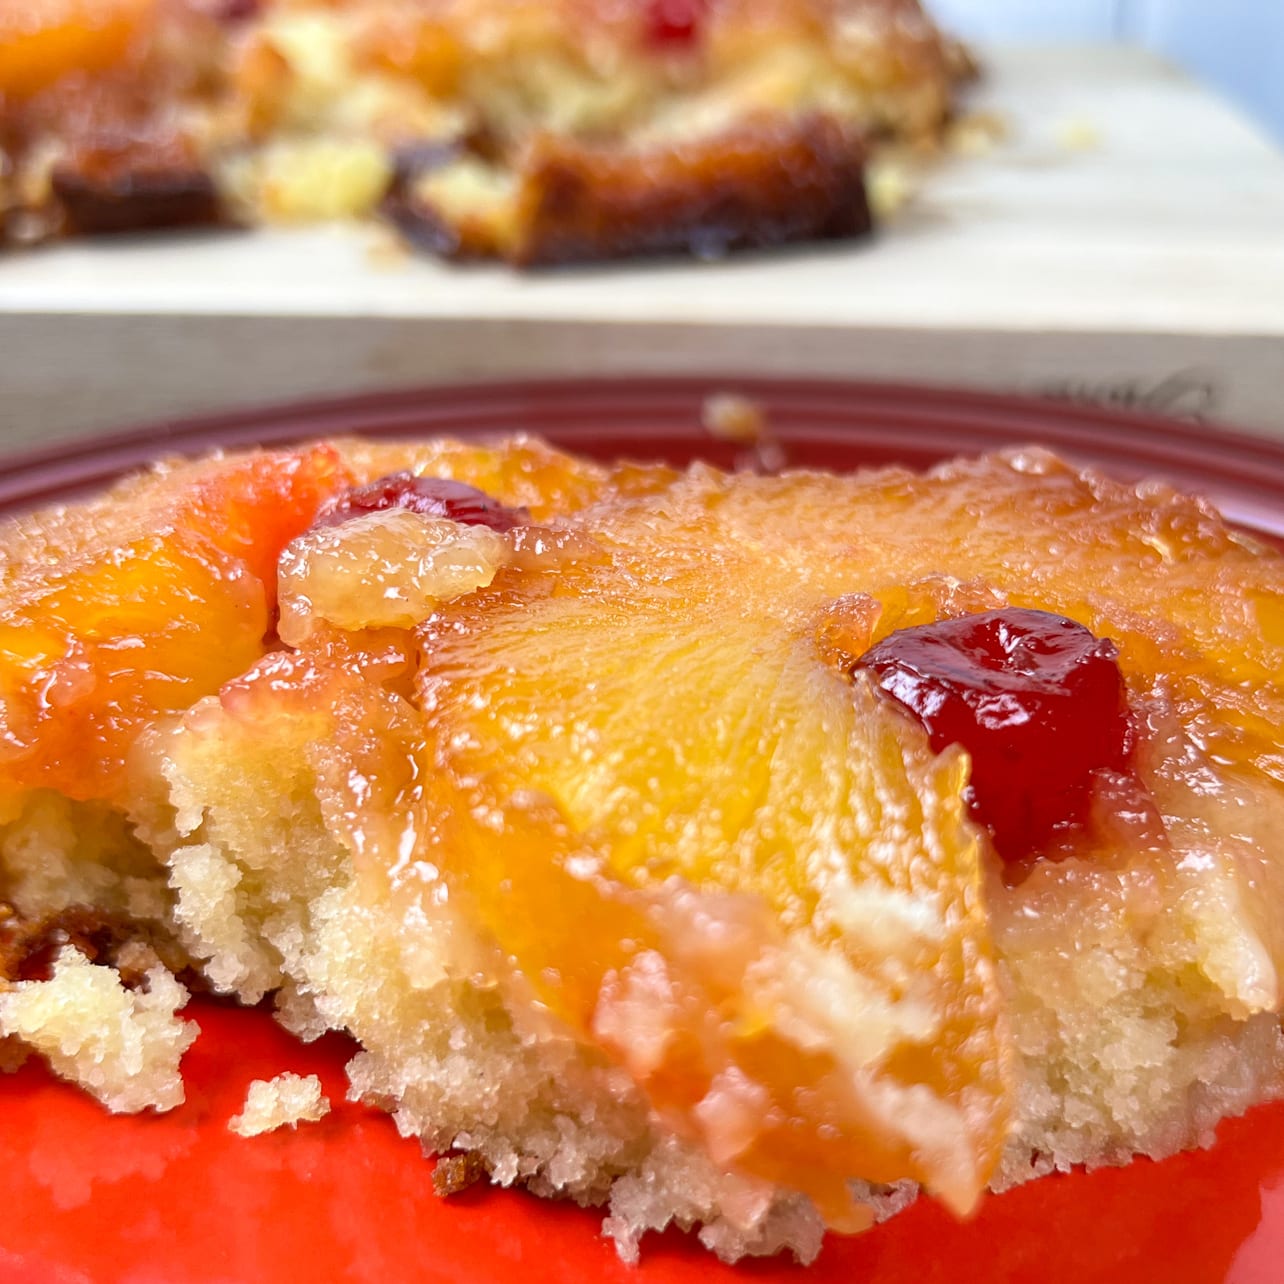 Pineapple Upside Down Cake from a Box Mix - Out of the Box Baking